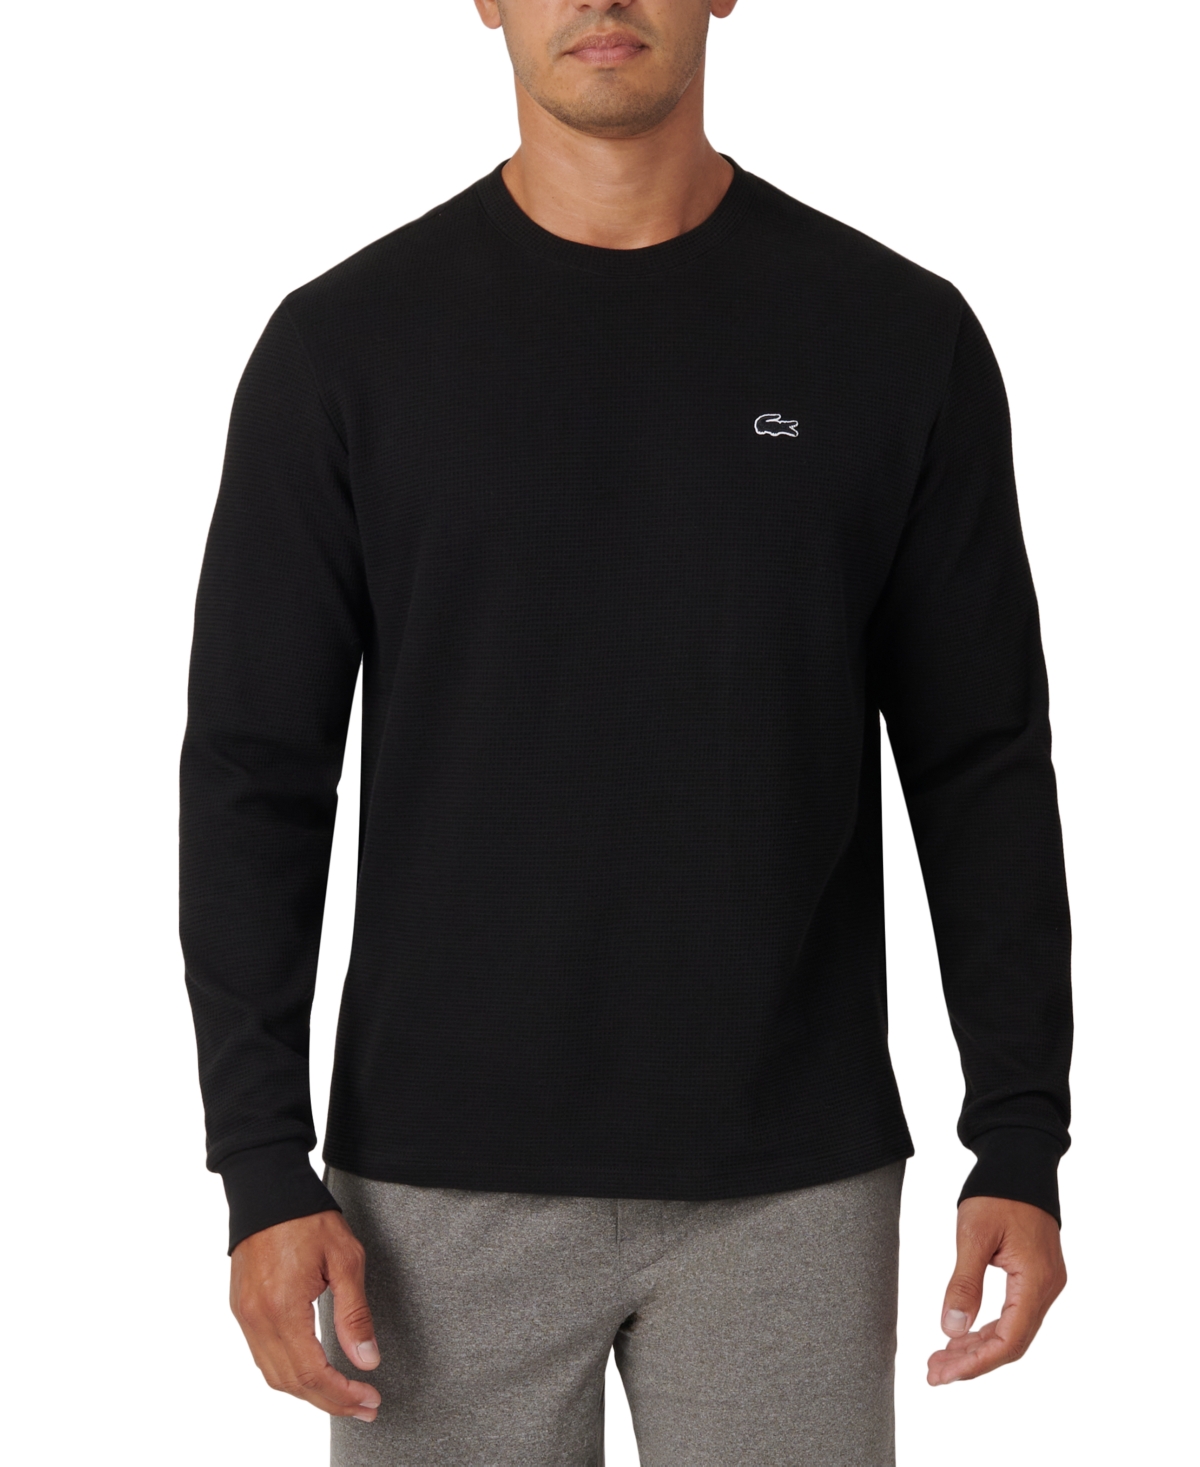 Lacoste Men's Relaxed Fit Waffle-Knit Thermal Sleep Shirt